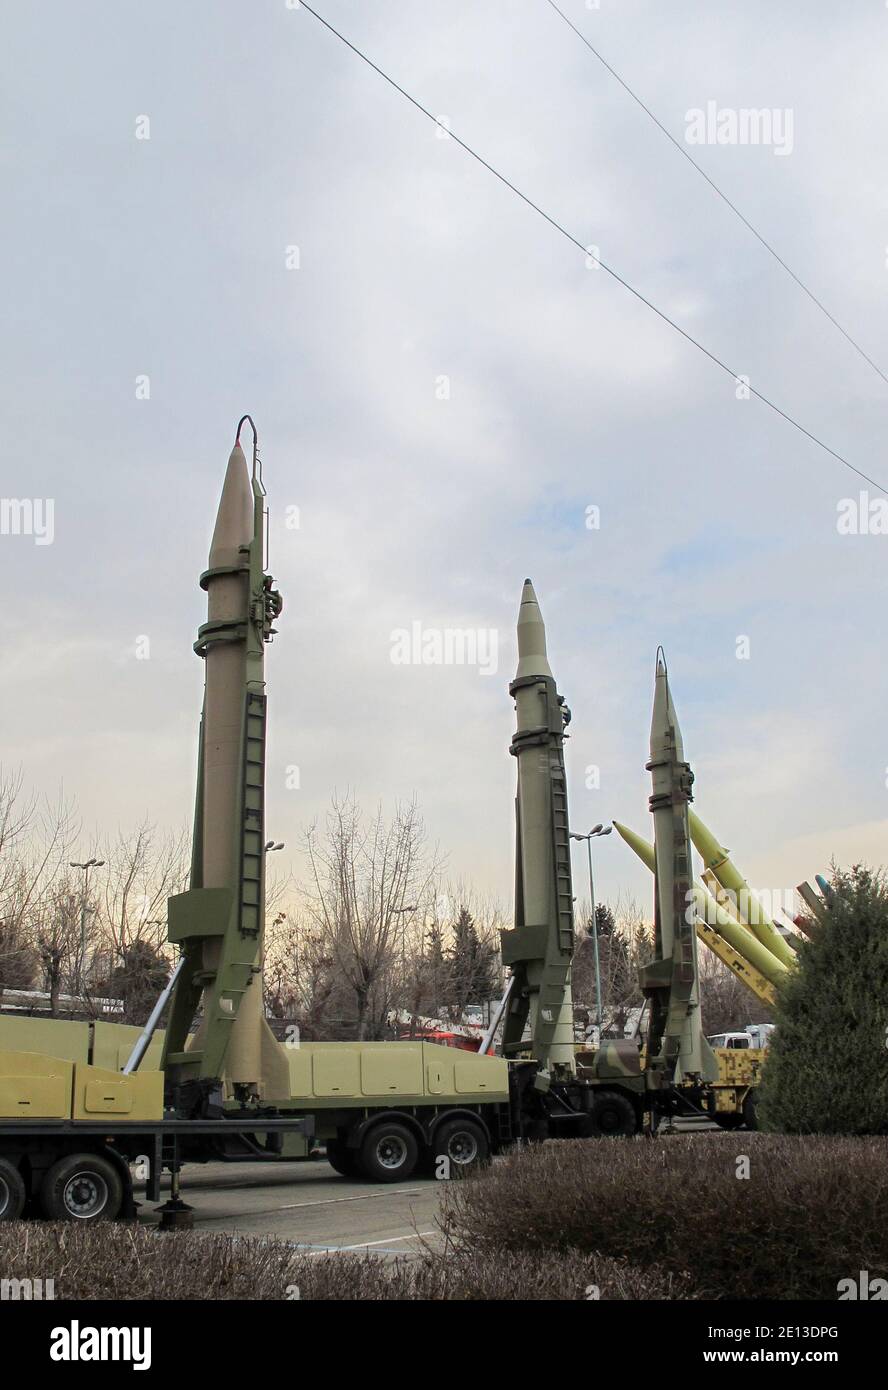 Iranian ballistic missiles at 'Authority 40' military exhibition in Tehran. the missiles from left to right: Shahab 1, Qiam, and Shahab 2 Stock Photo